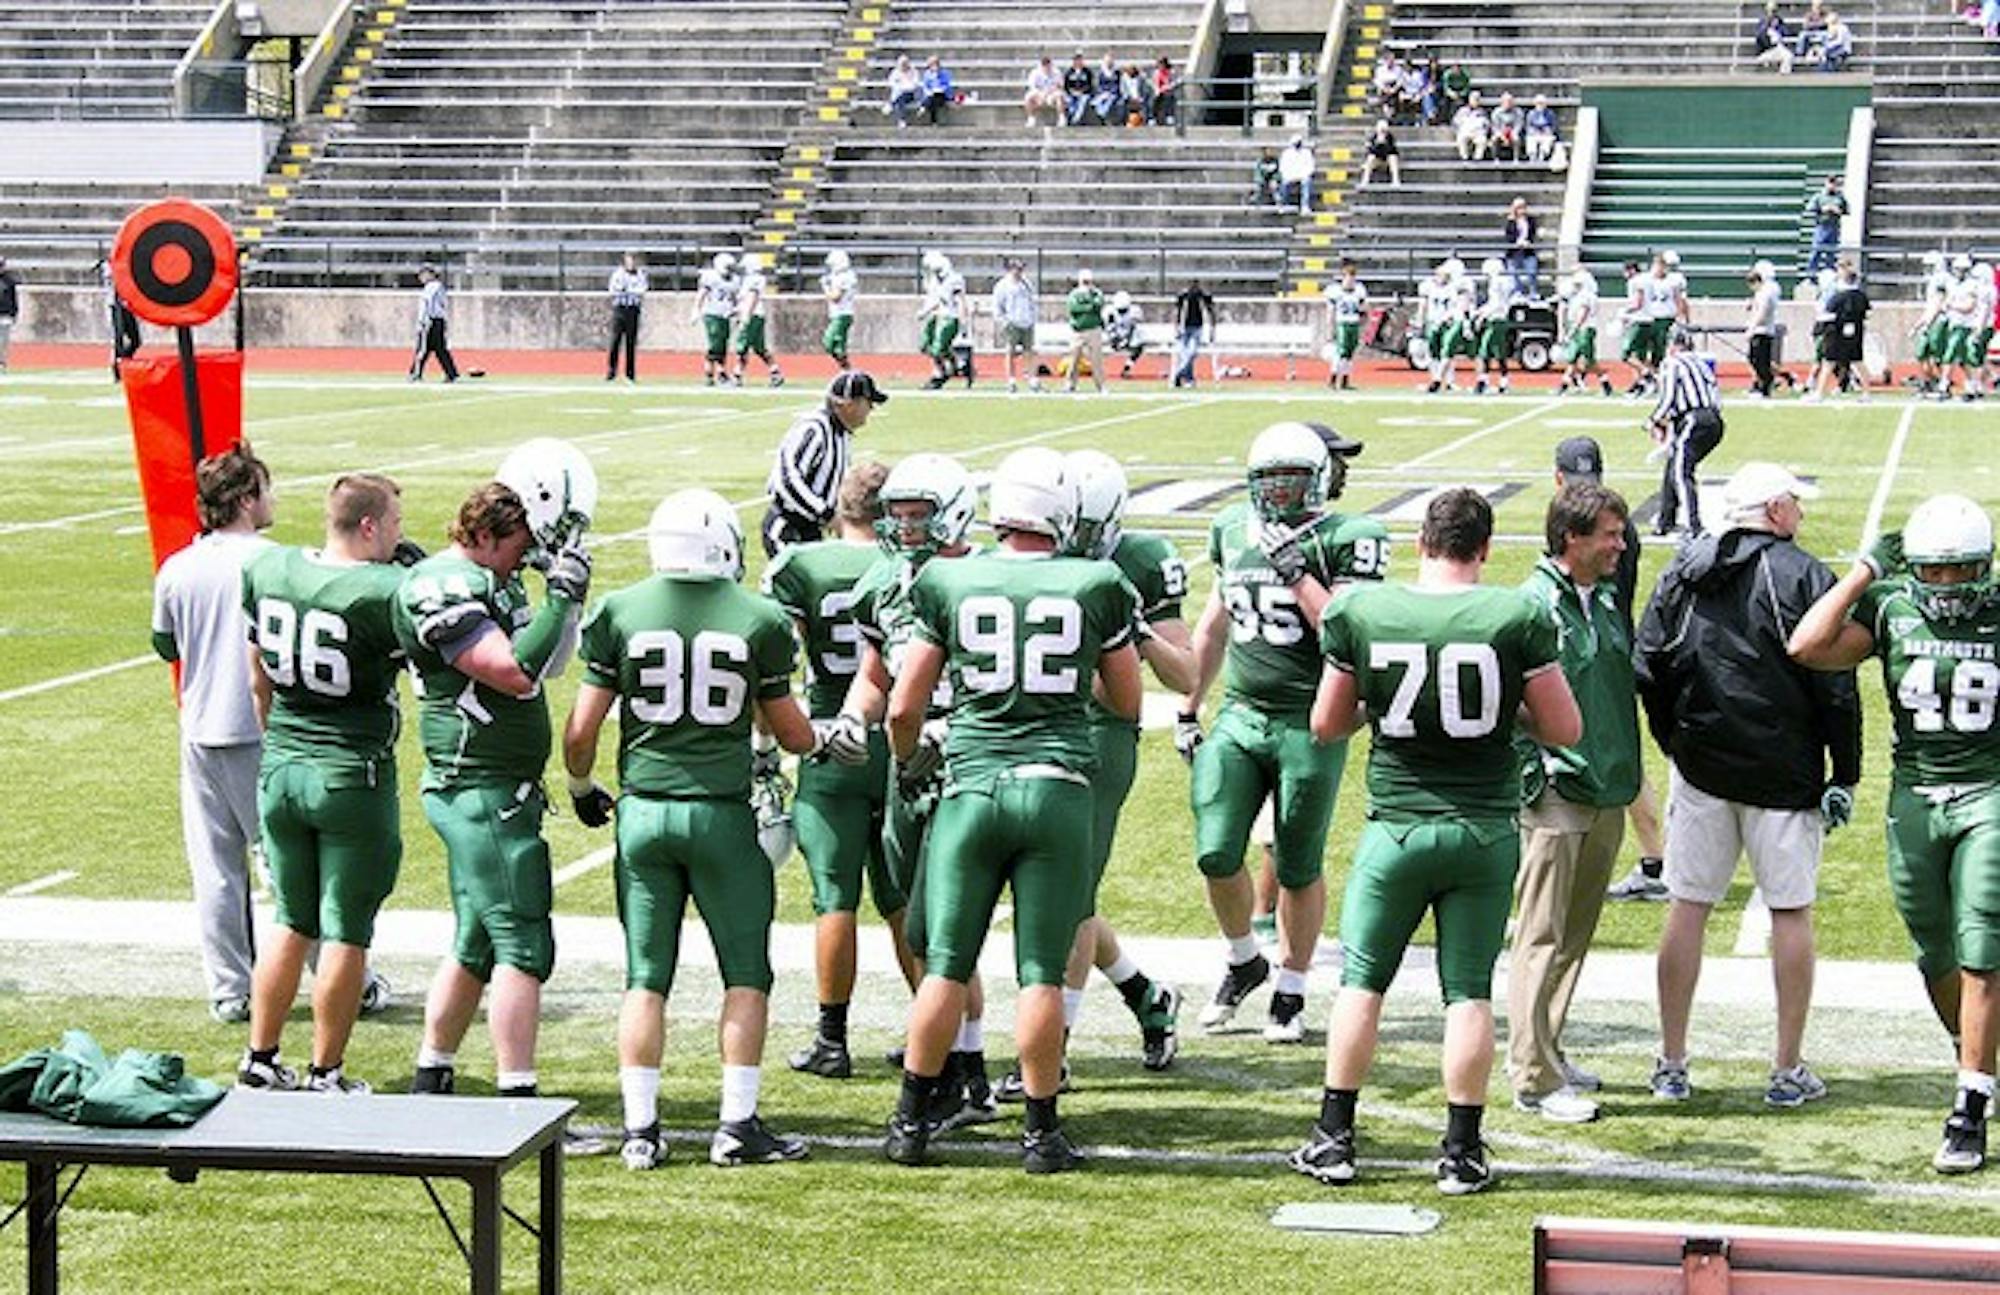 The Green and White Game was played without tackling to avoid injuries and to increase the number of snaps.